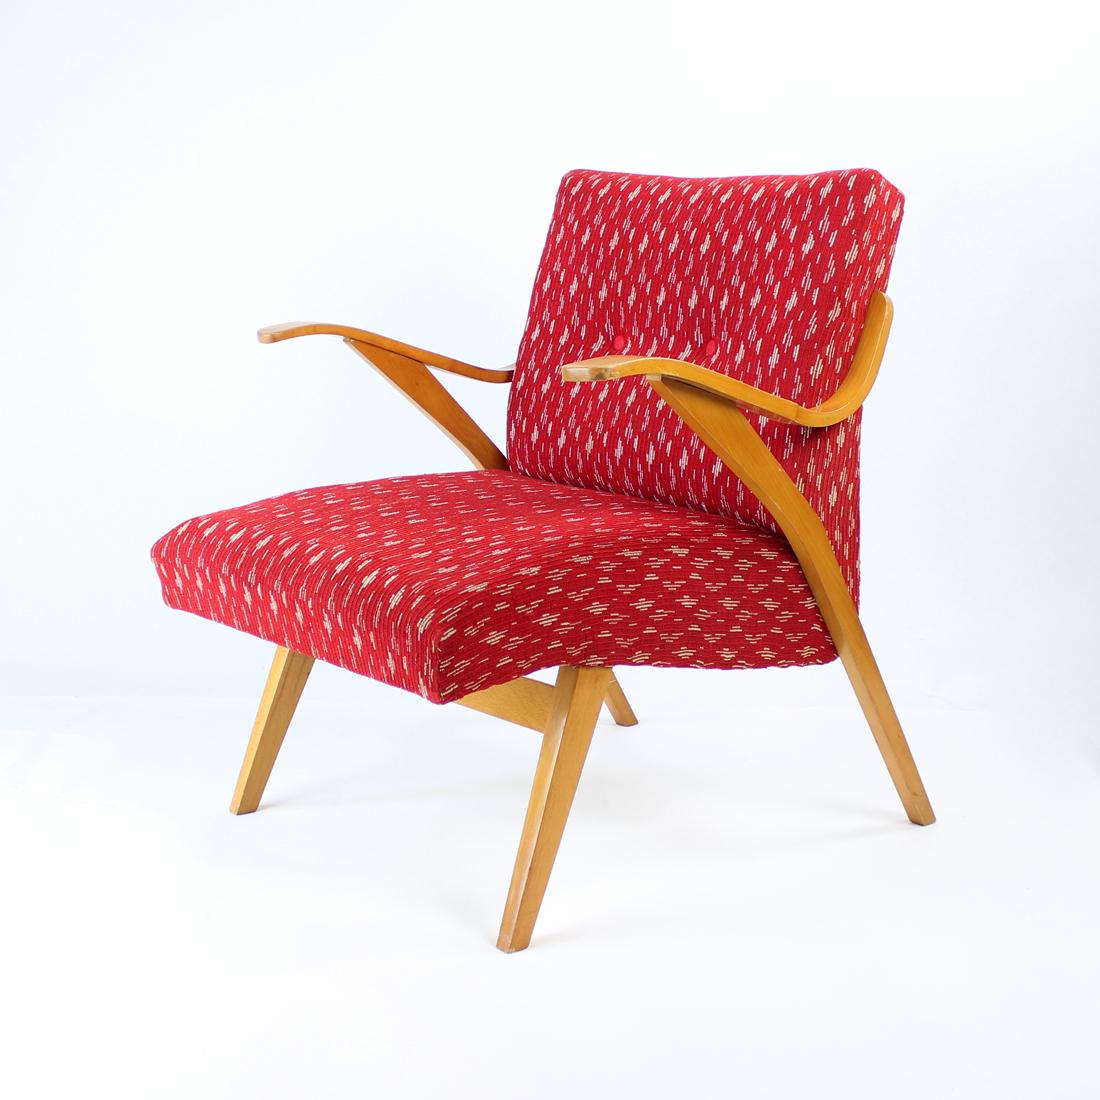 Mid-Century Modern Midcentury Armchair in Original Red Fabric & Blonde Wood, Czechoslovakia, 1960s For Sale